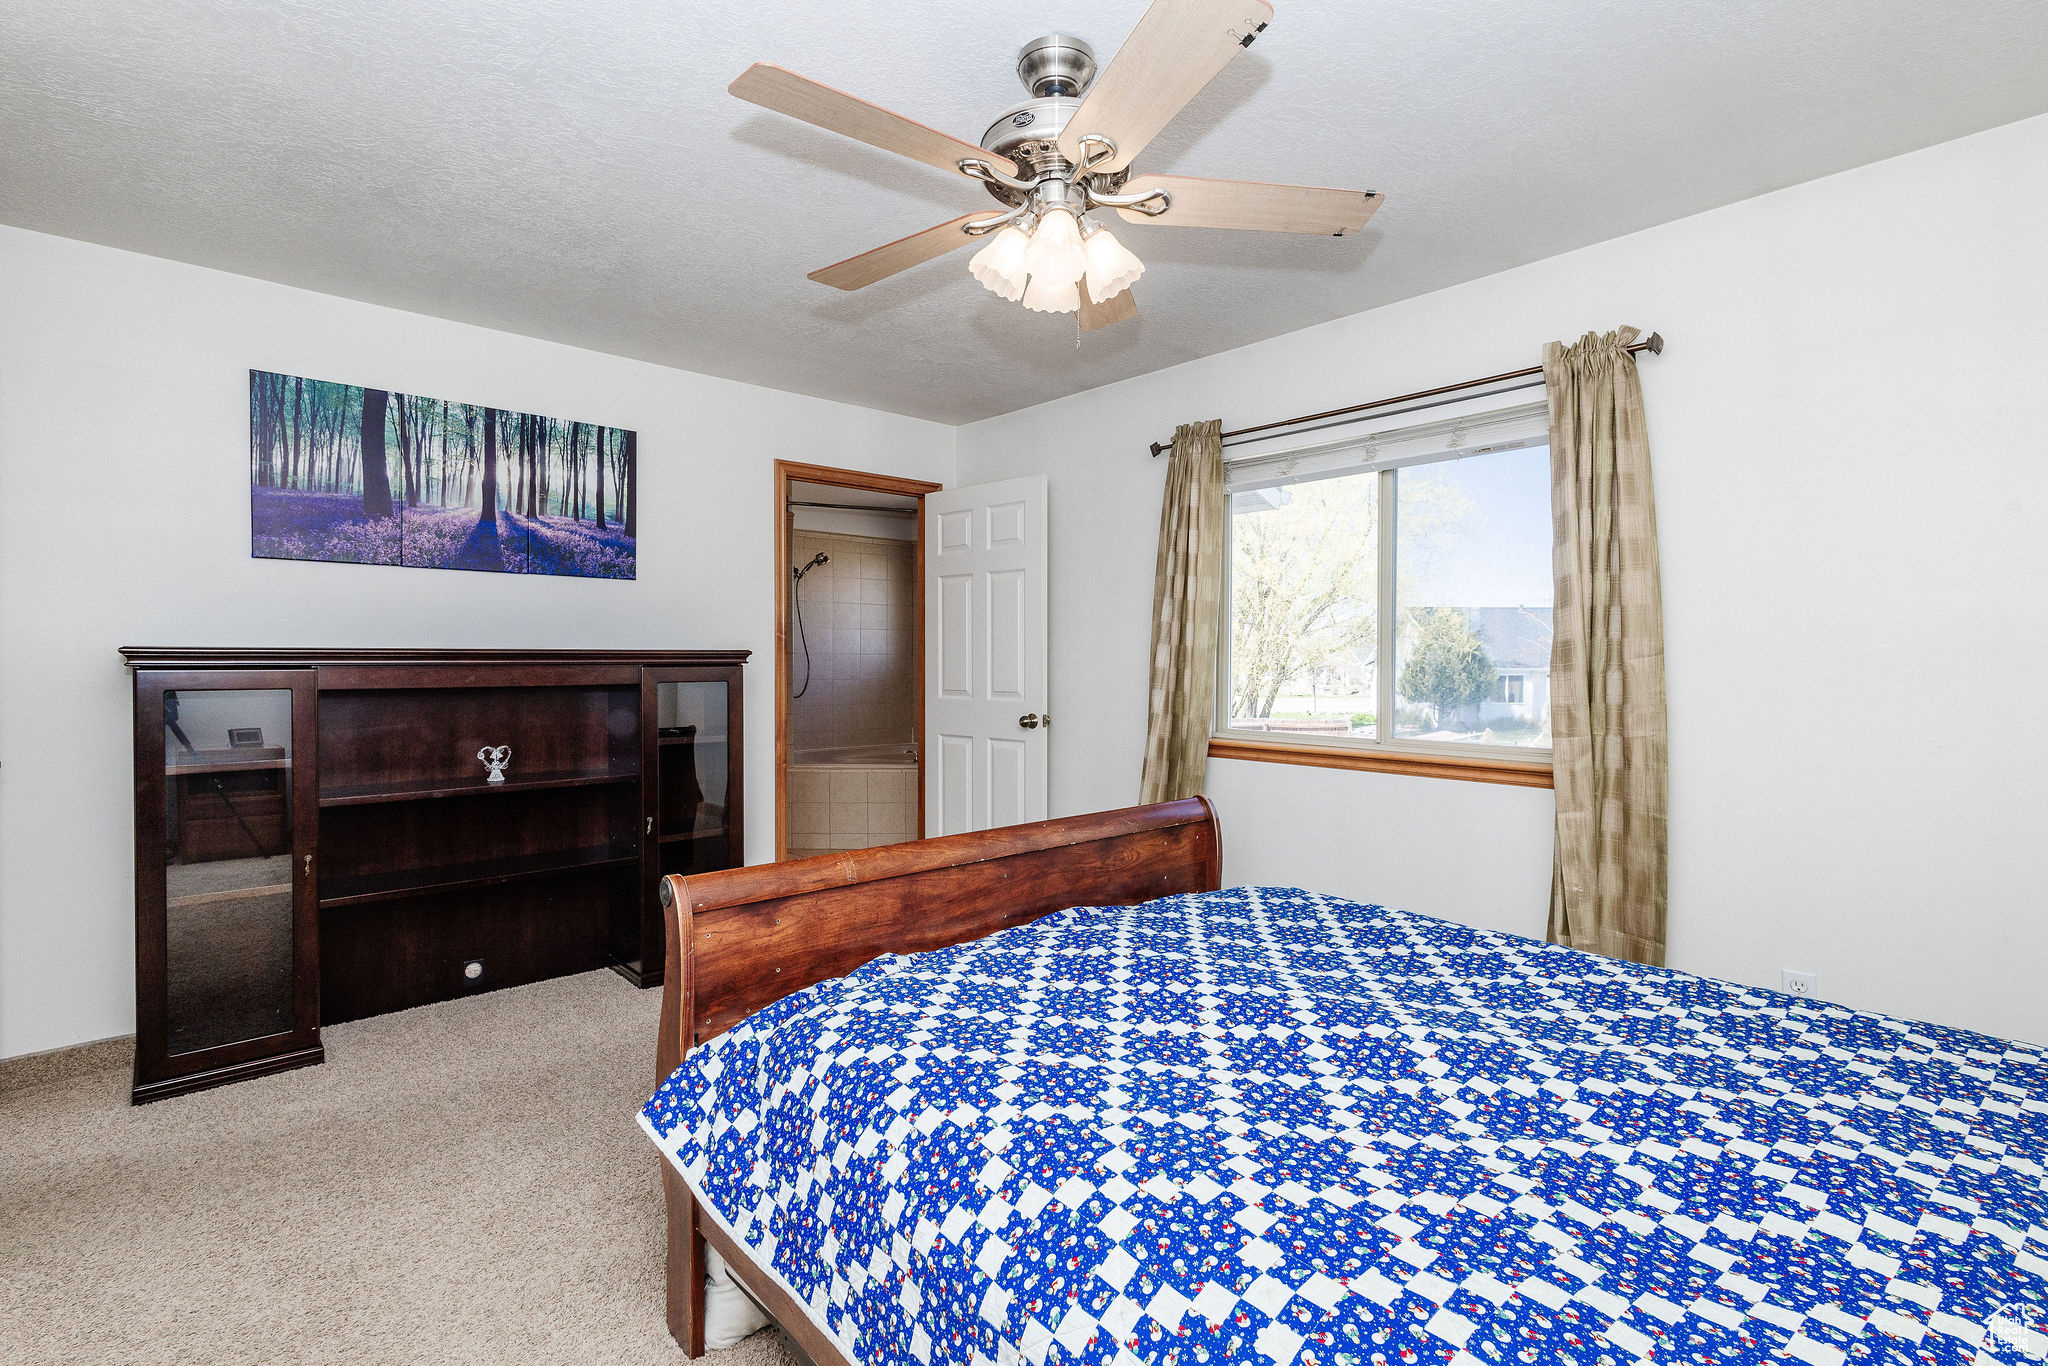 Owner's Suite Bedroom featuring light colored carpet, ceiling fan, and a textured ceiling